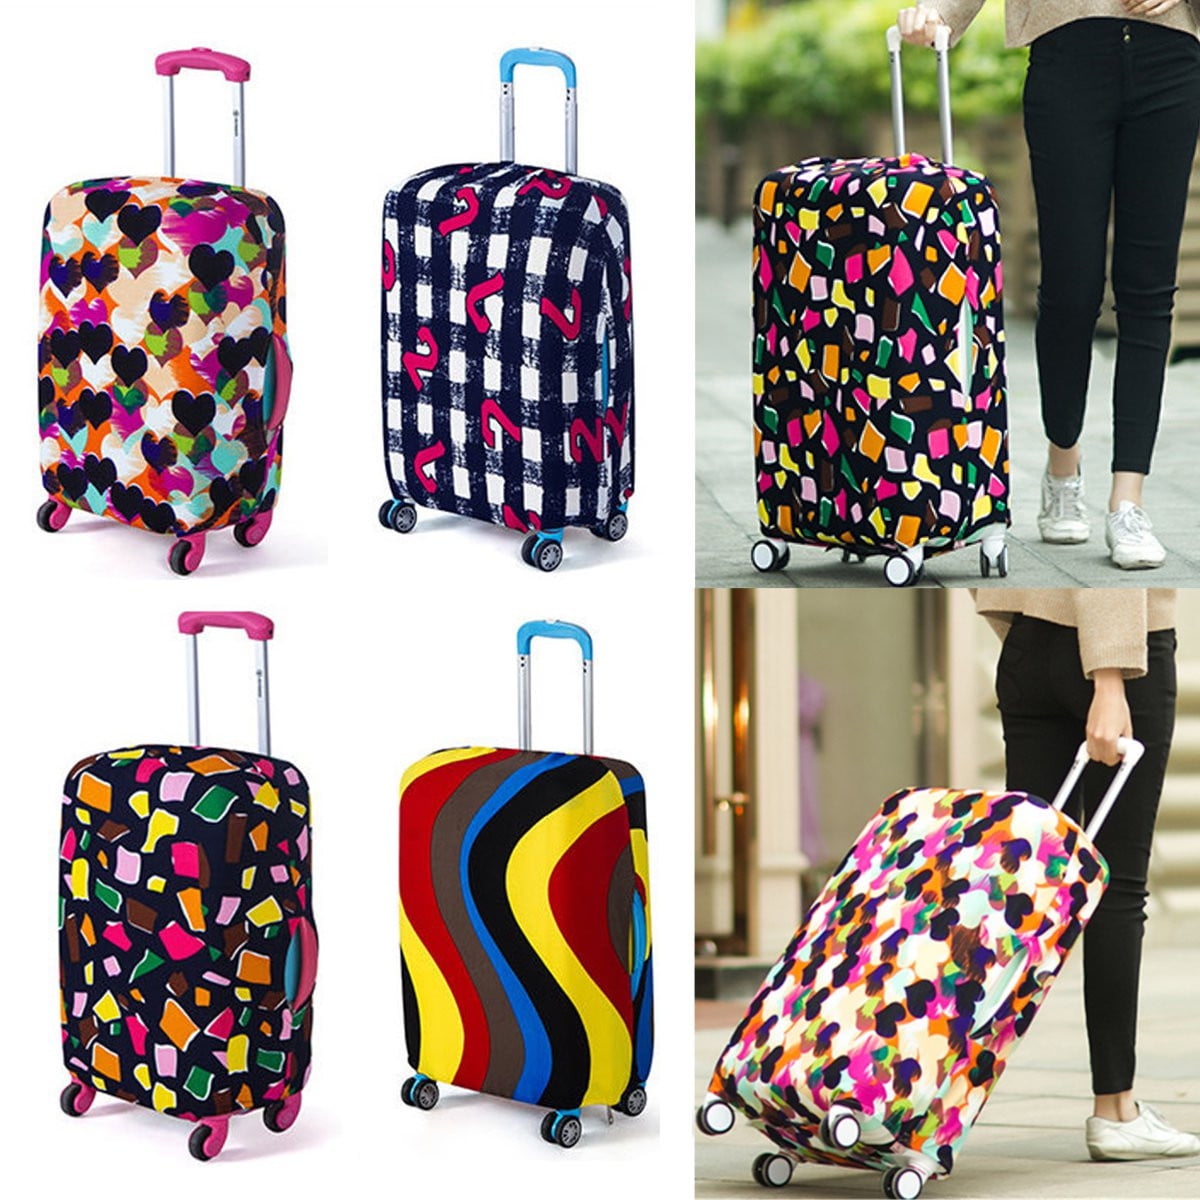 Elastic Travel Luggage Cover Summer Beach Suitcase Protector for 18-20 Inch Luggage